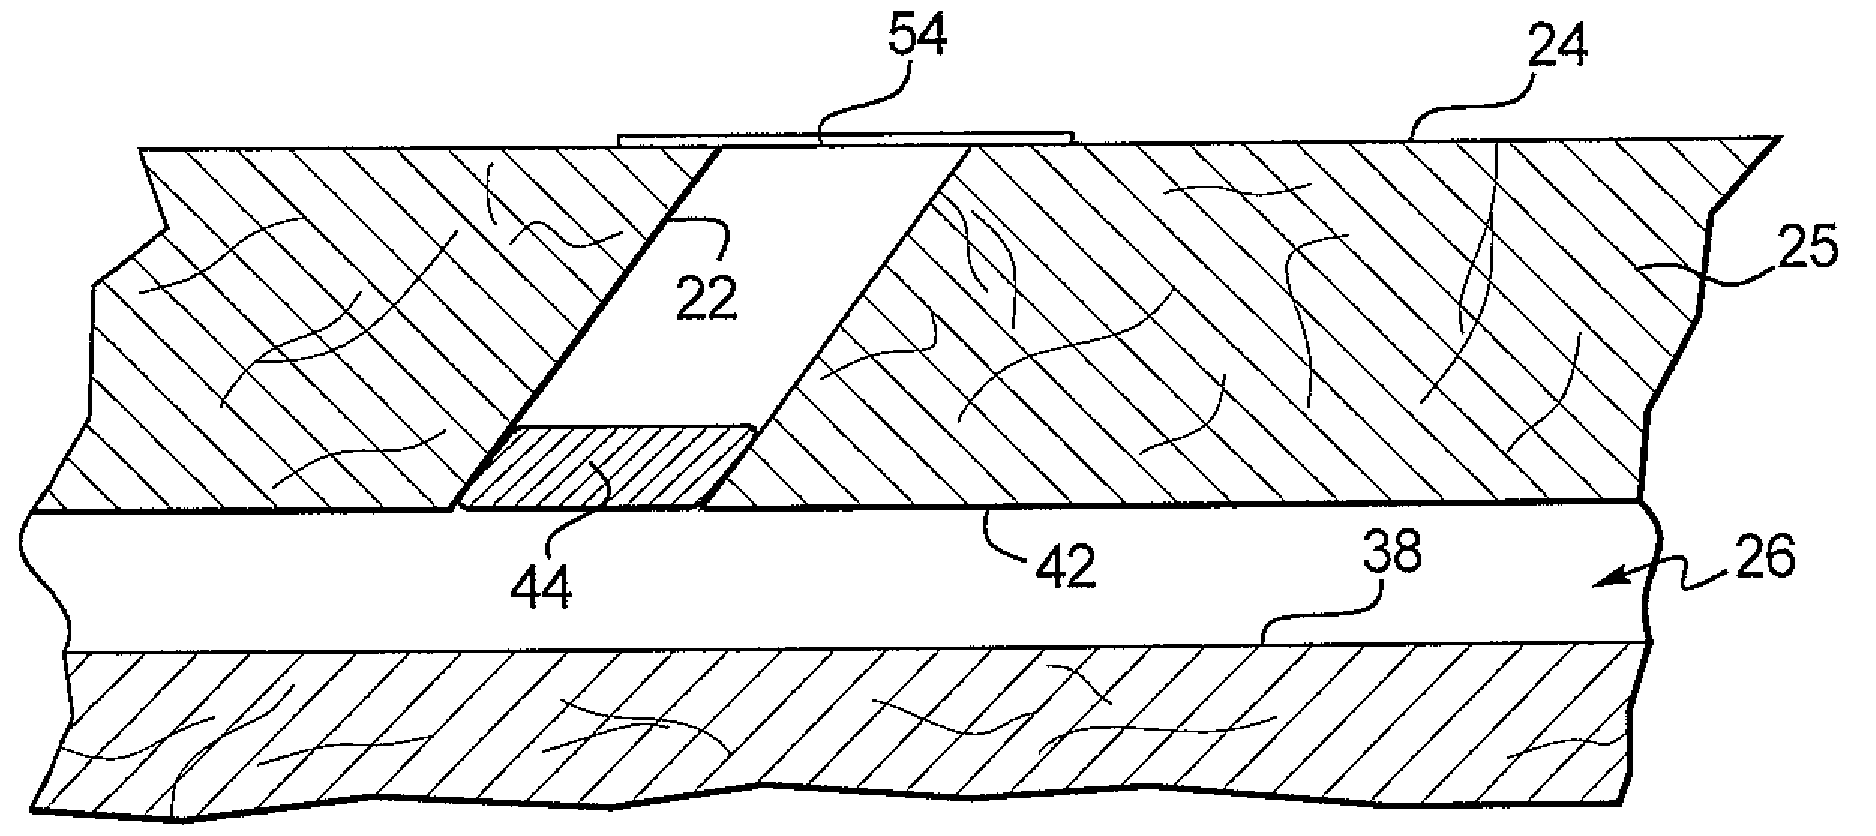 Apparatus and Method for Closing an Opening in a Blood Vessel Using Memory Metal and Collagen